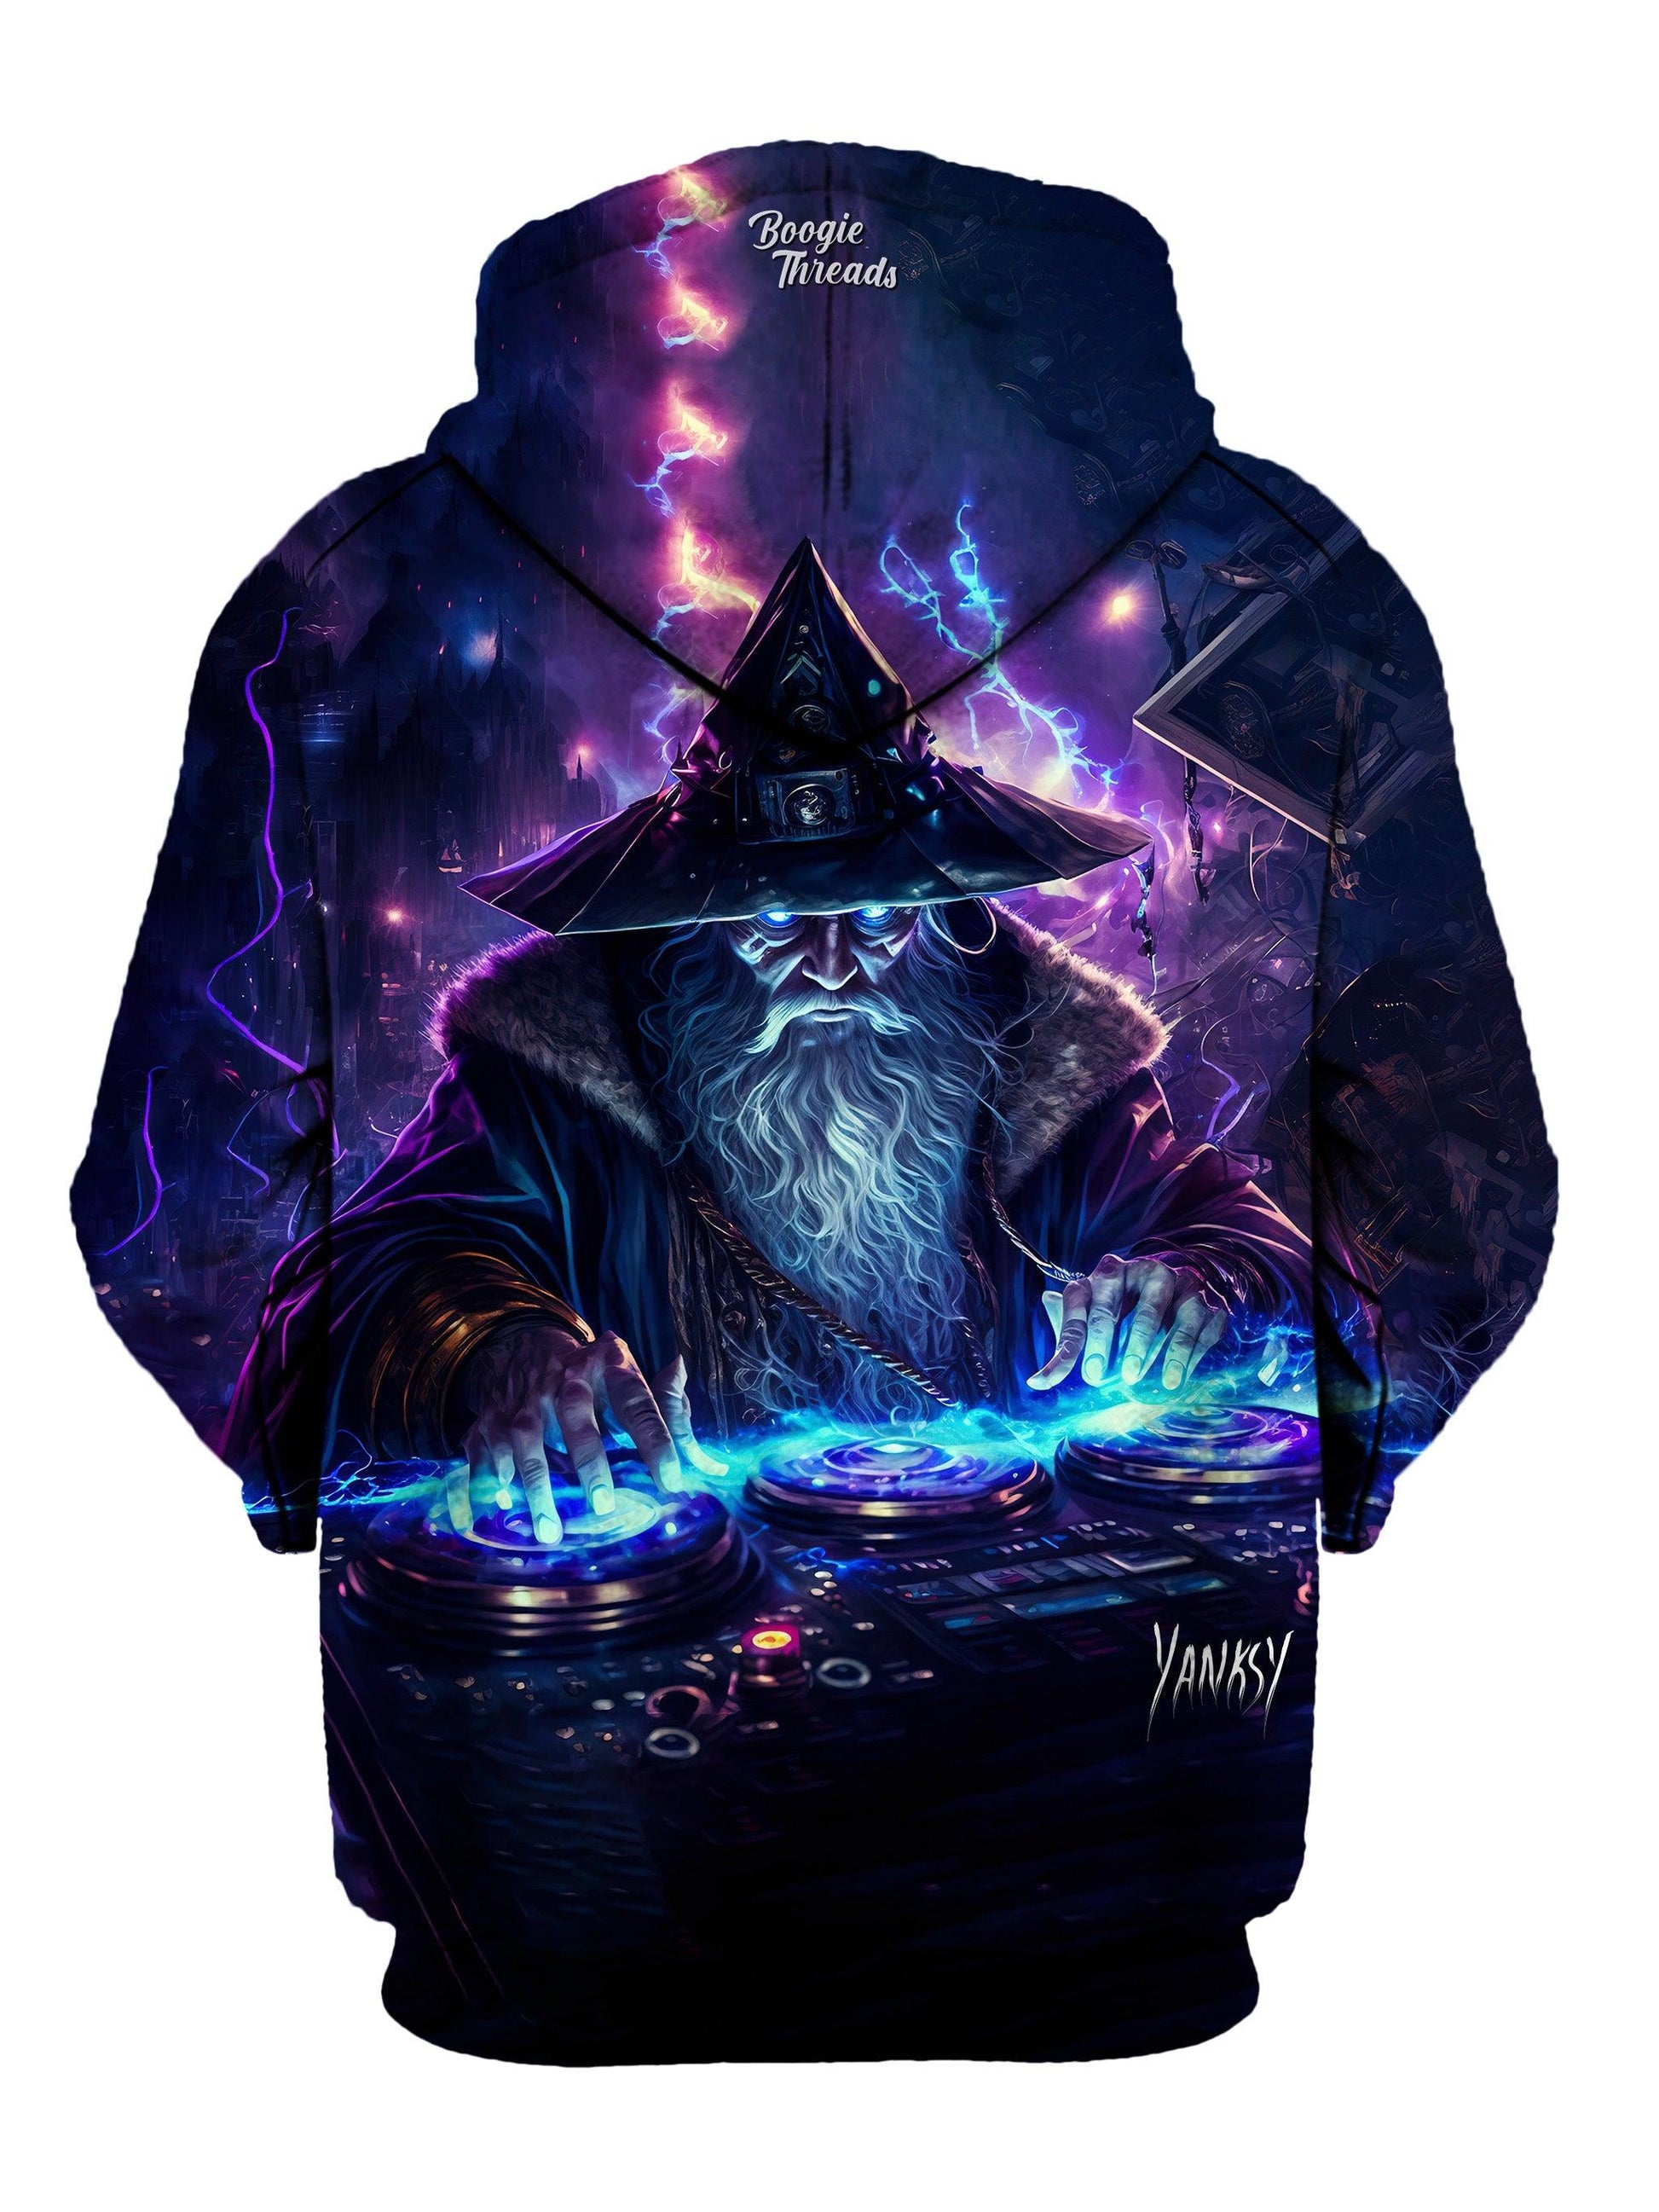 Stay comfortable and stylish all day and night at festivals and raves with this pullover hoodie